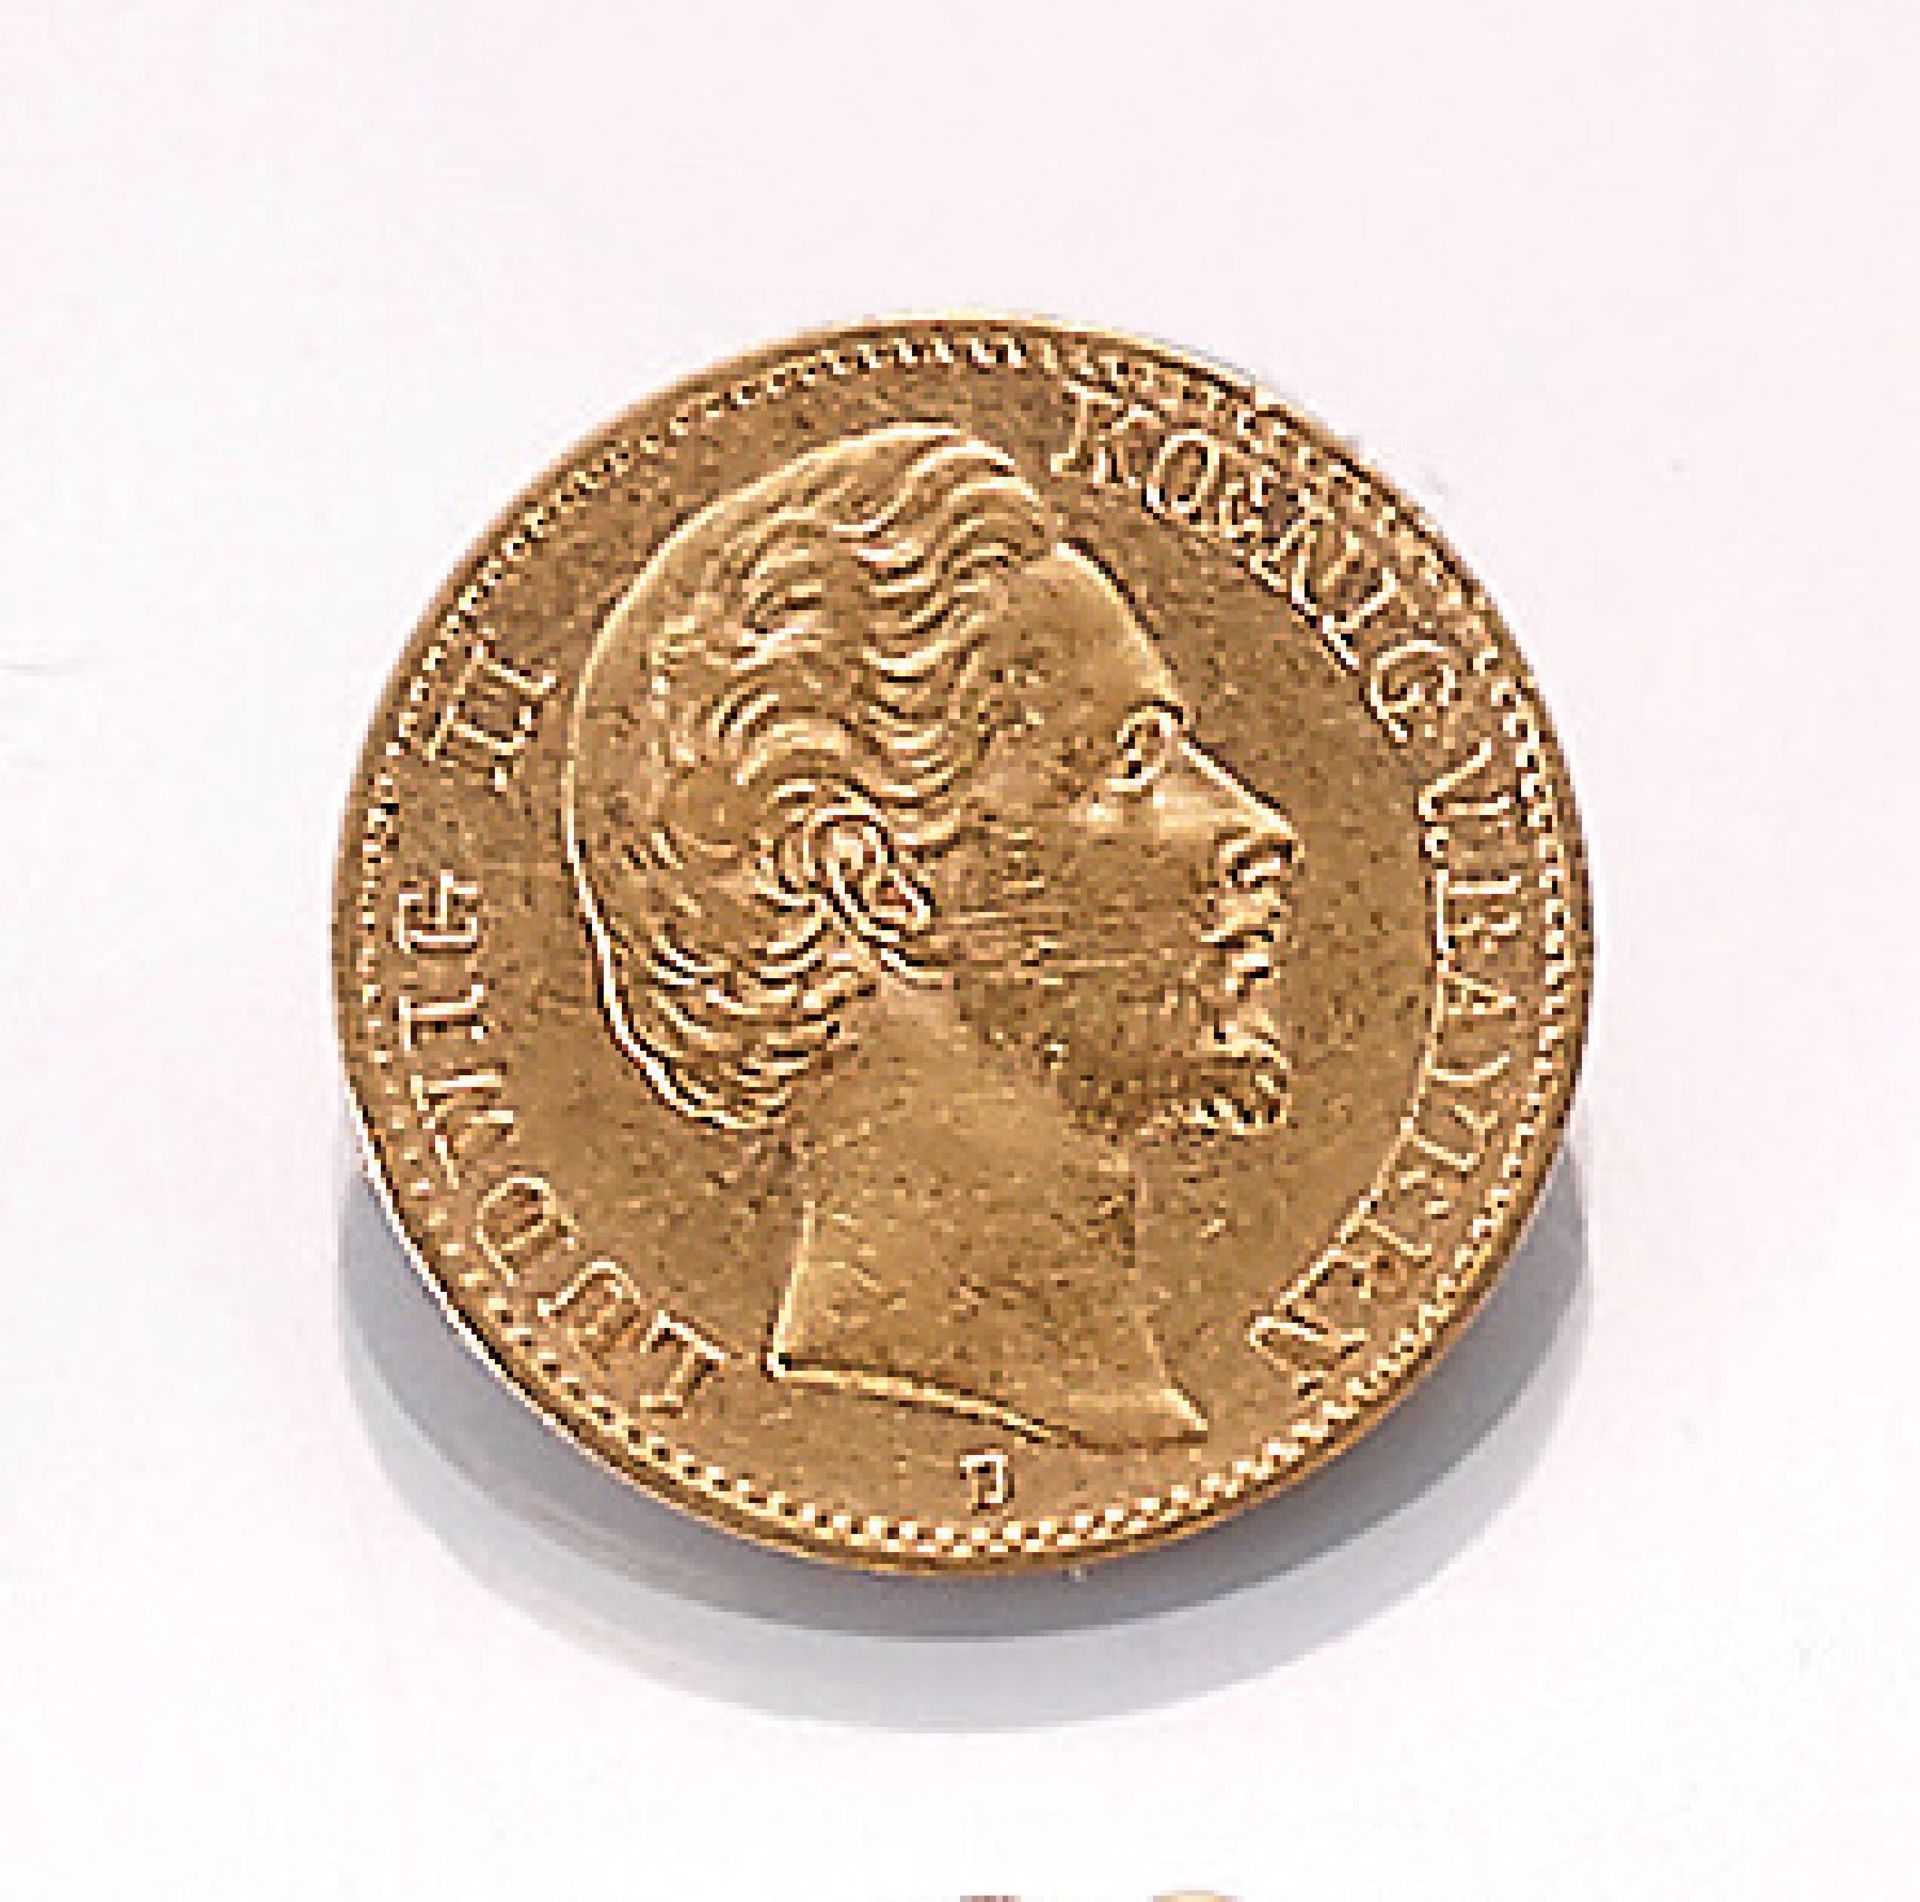 Gold coin, 10 Mark, German Reich, 1875 , Ludwig II. king of Bavaria, impressed mark D